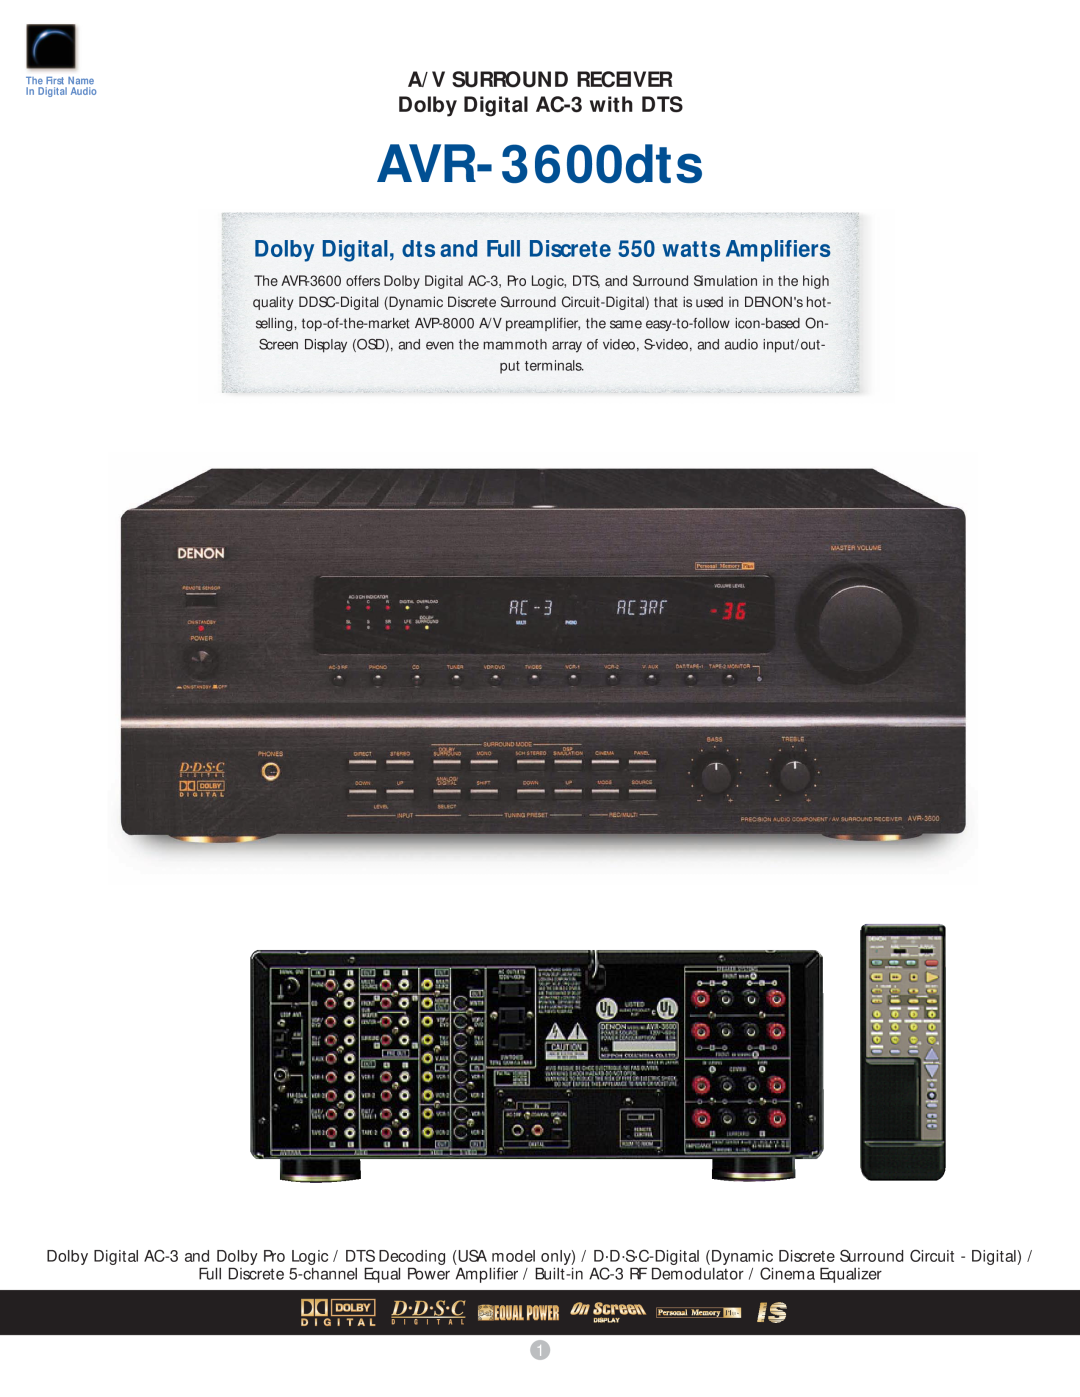 Dolby Laboratories AVR-3600DTS manual AVR-3600dts, A/V SURROUND RECEIVER Dolby Digital AC-3with DTS 